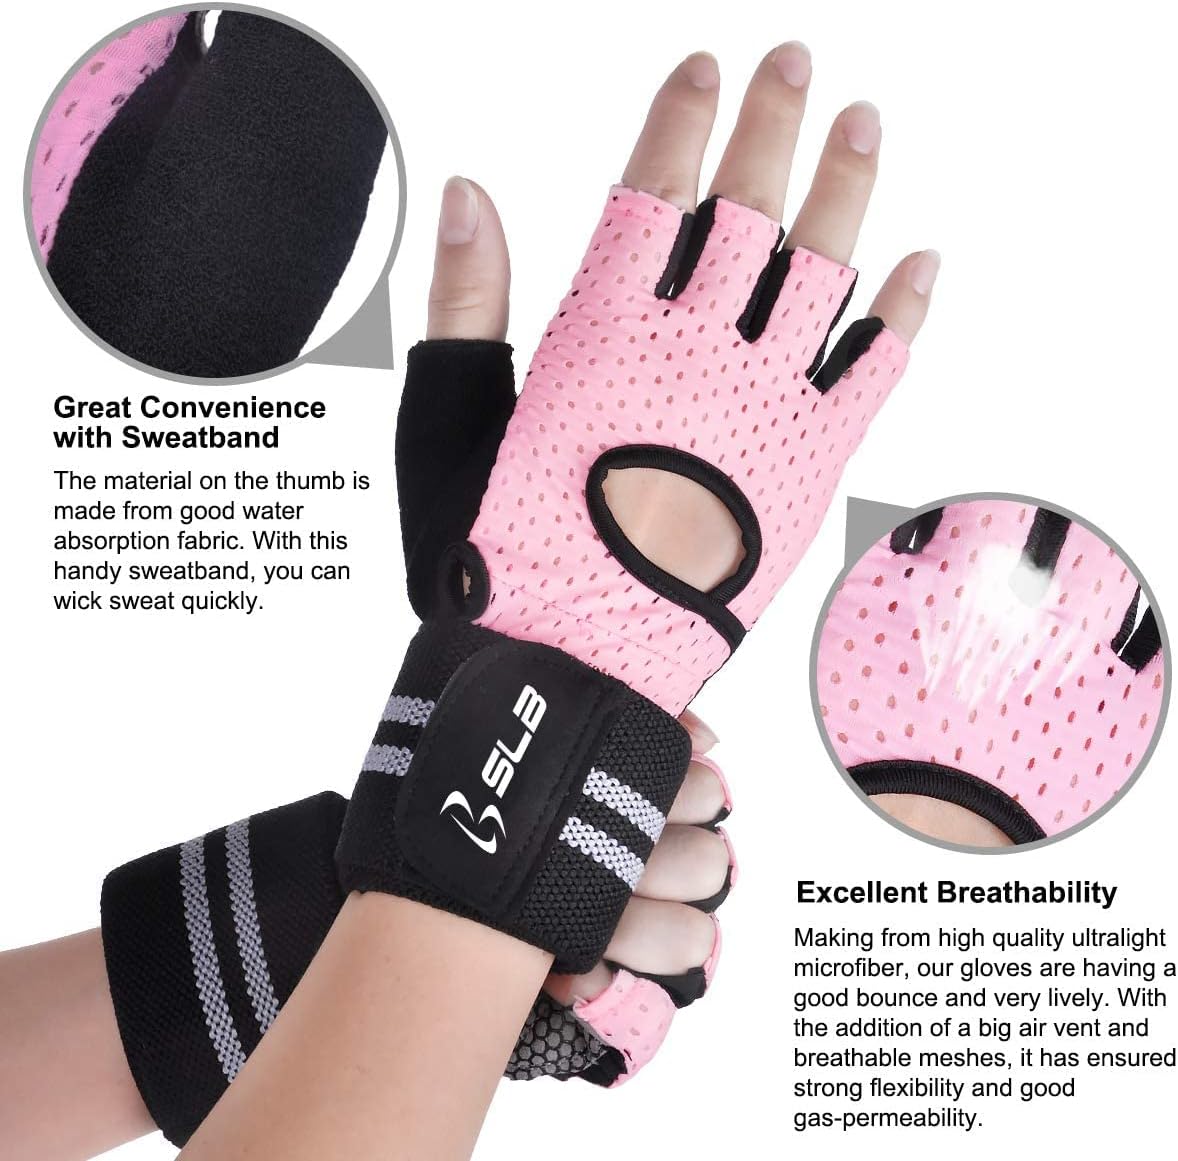 Gym Gloves - SLB Training Gloves with Full Wrist Support, Palm Protection and Extra Grip, Breathable Sport Gloves, Great for Weight lifting/Cross Fit Training/Cycling(Suit for Men  Women)